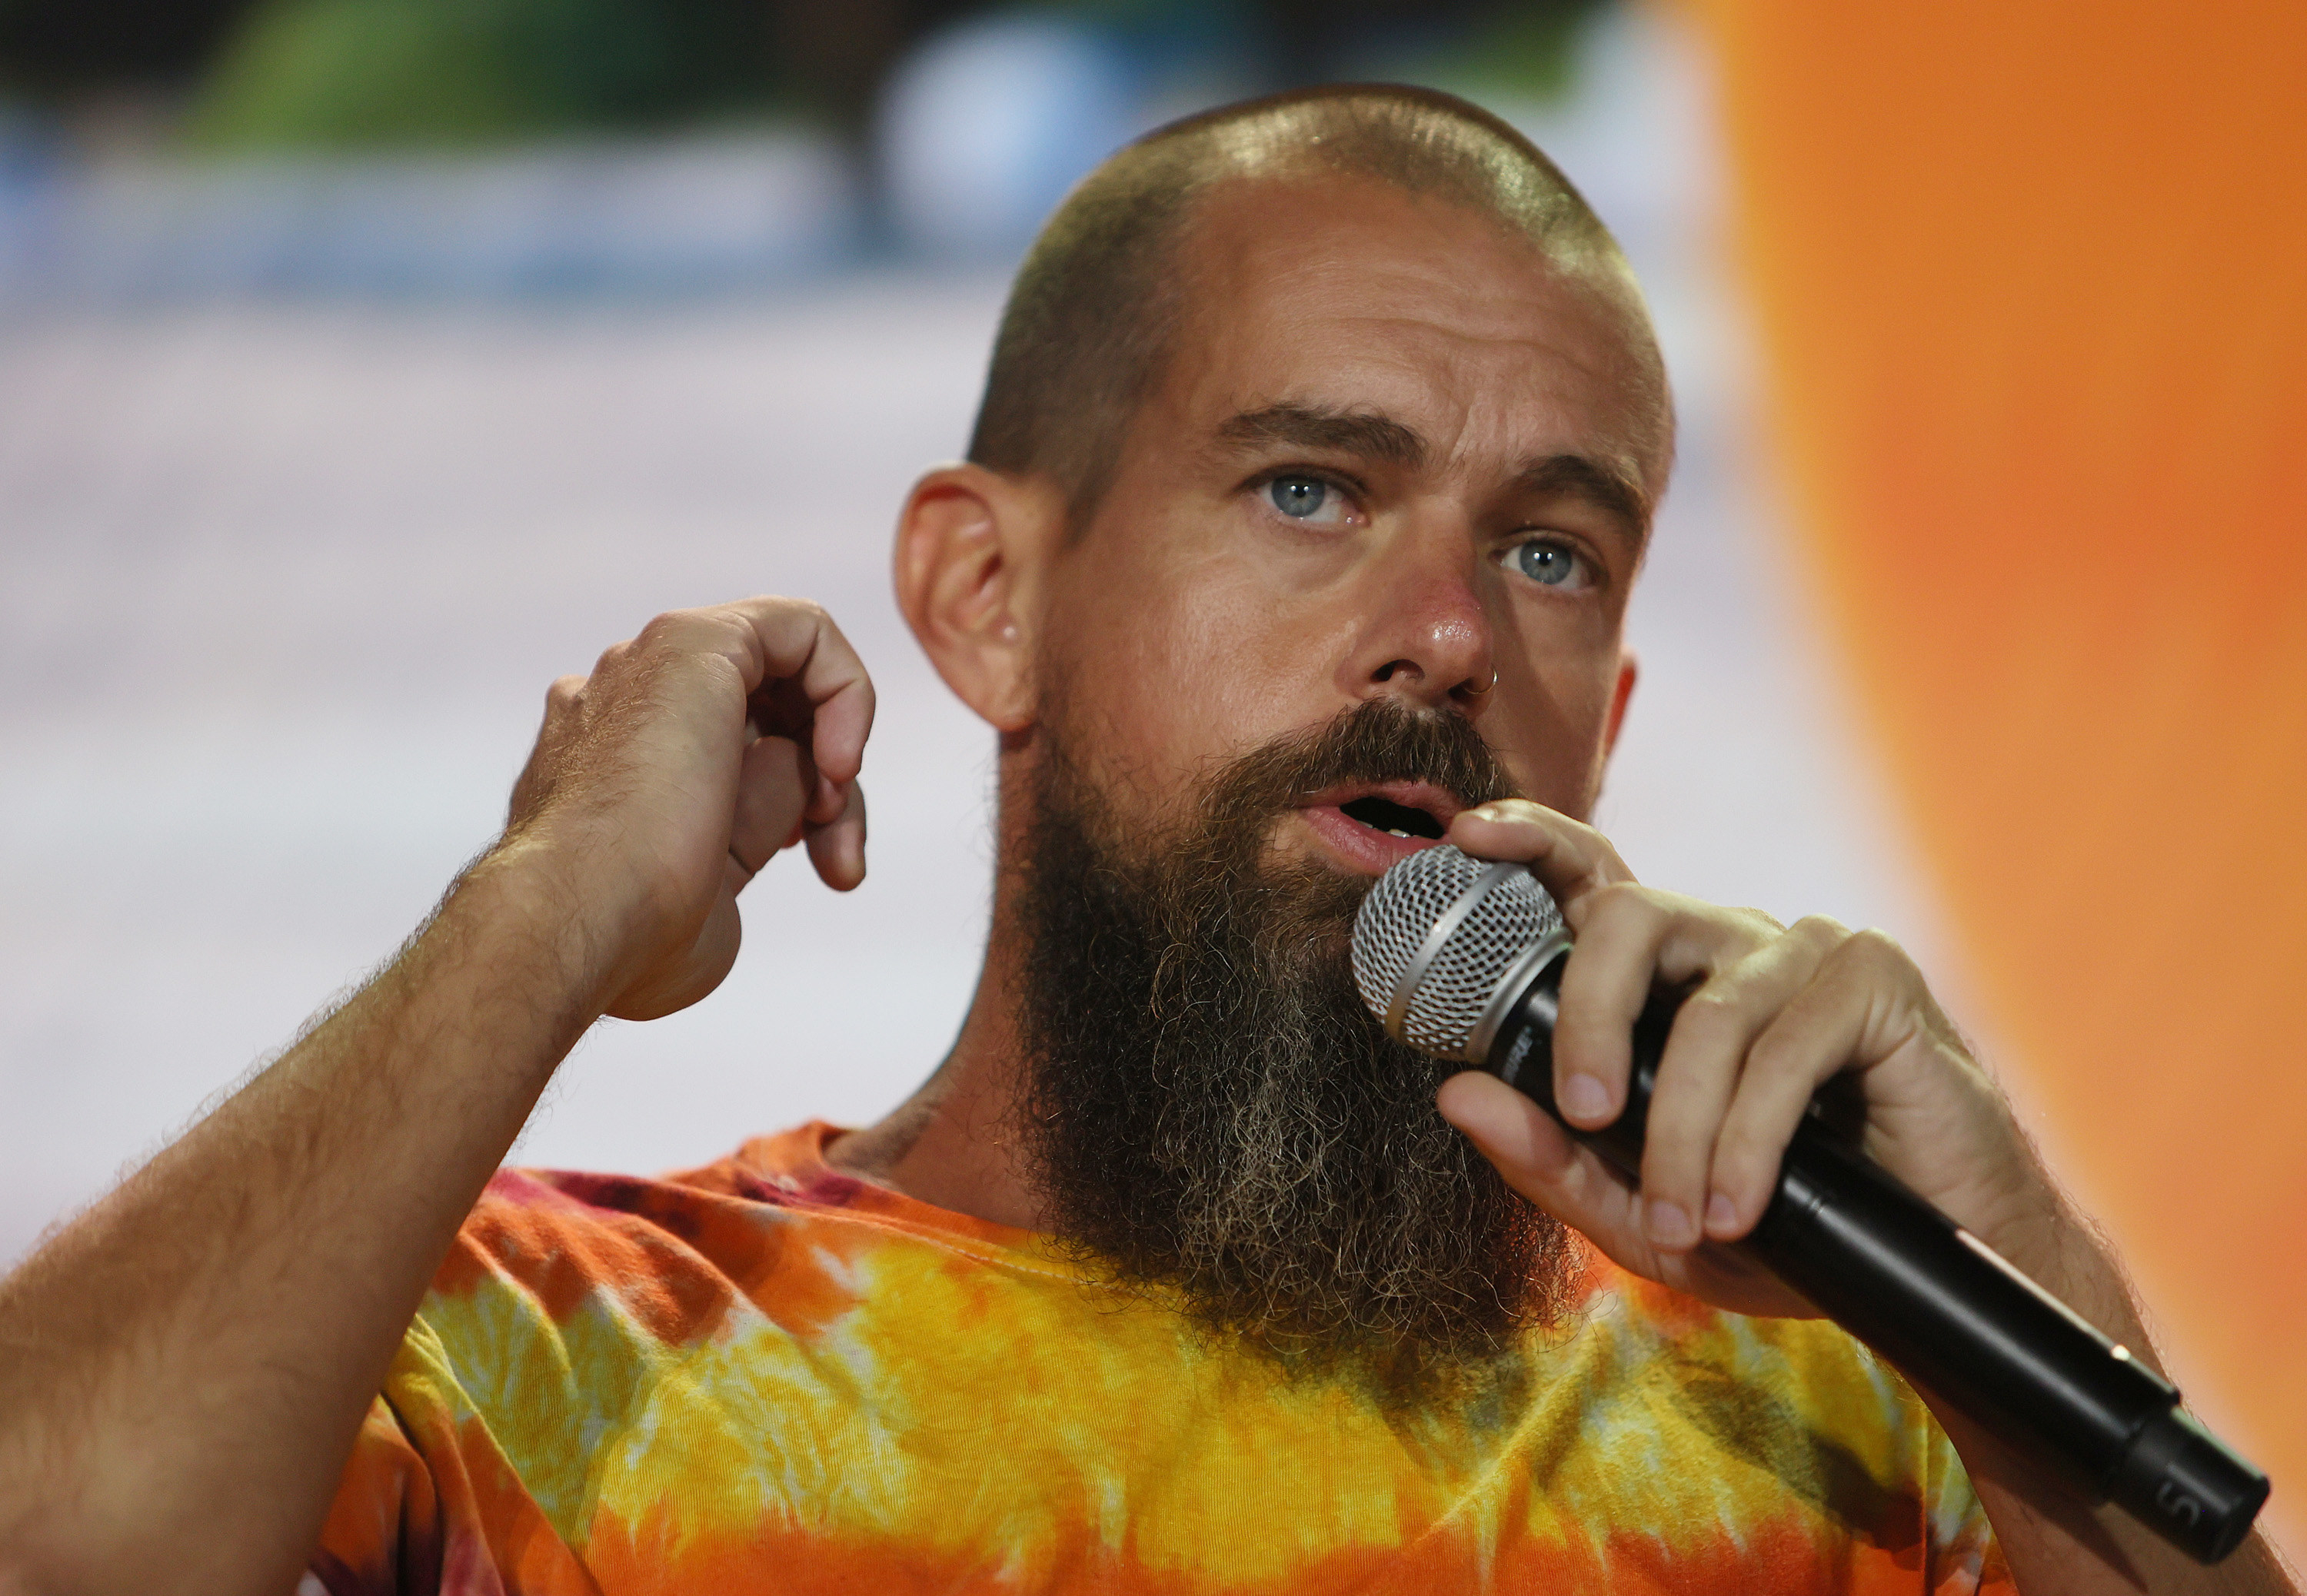 jack dorsey in an extensive beard and tie dye shirt holds a microphone